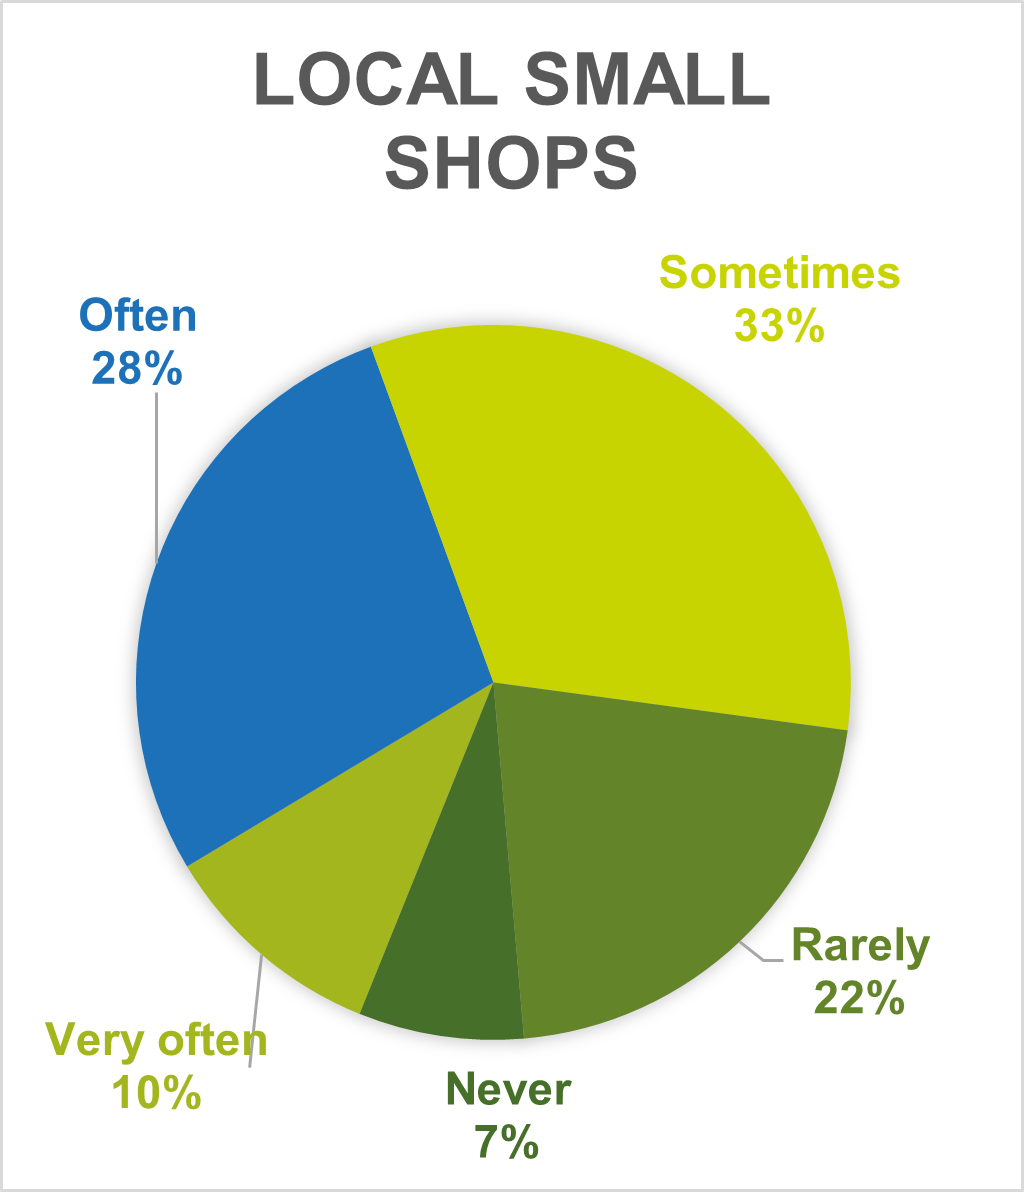 Pie chart showing frquency of shopping at local small shop